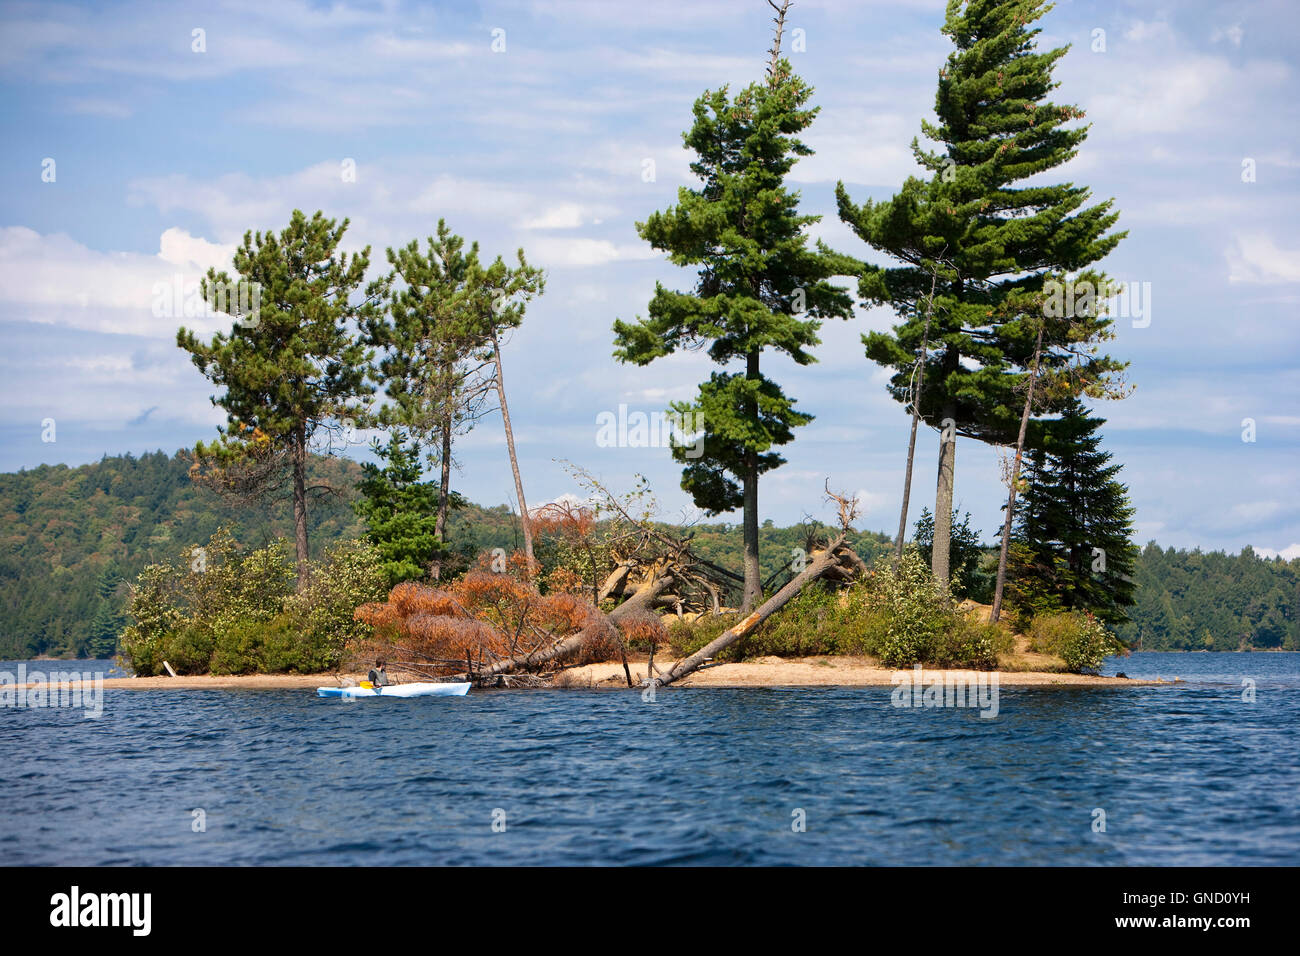 boy paddling kayak in lake with island, North America, Canada, Ontario, Algonquin Provincial Park Stock Photo